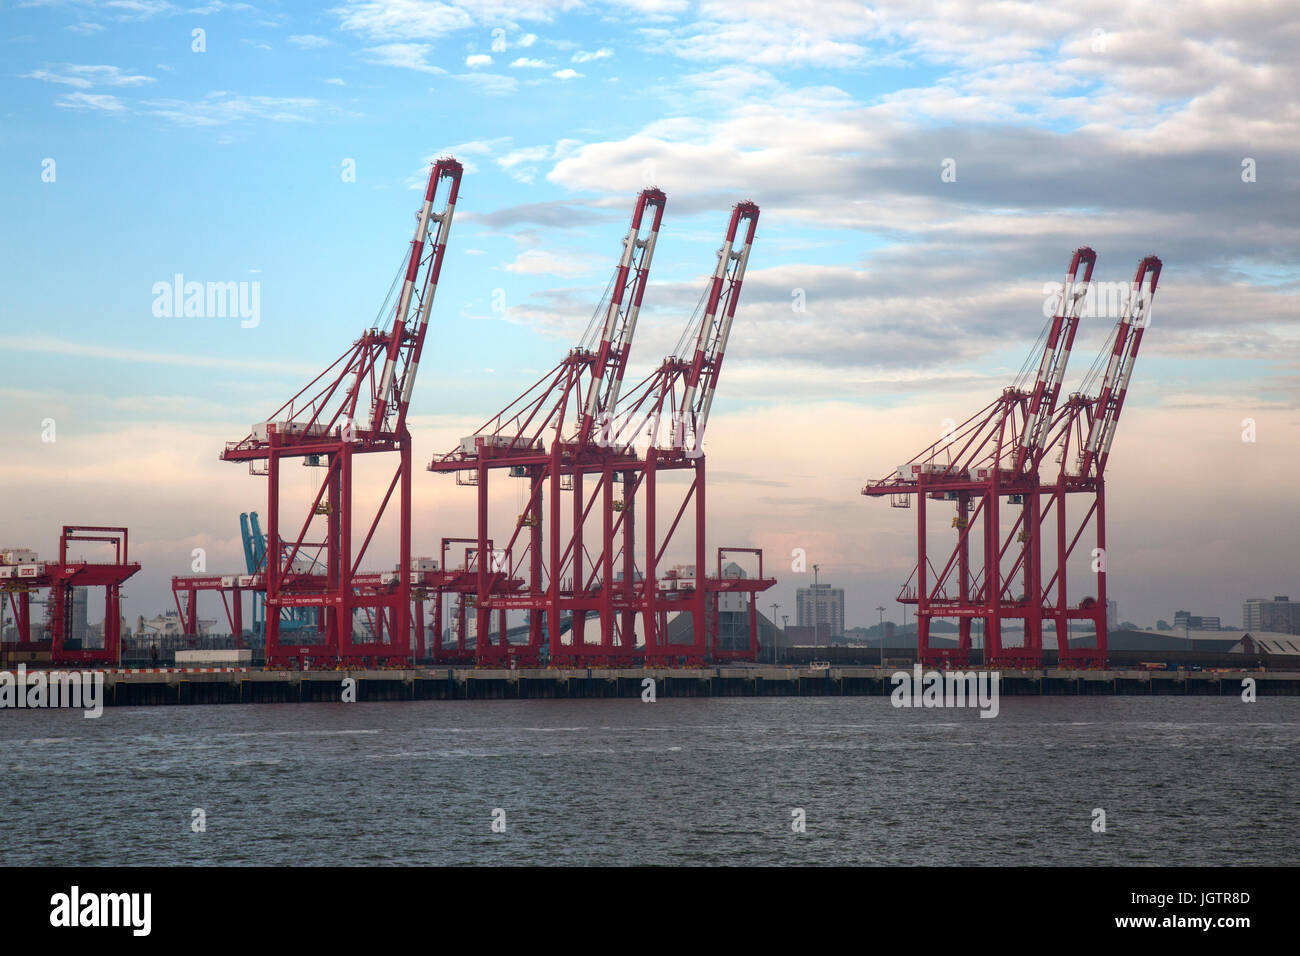 Large cranes at the mouth of The River Mersey, entering Liverpool in England. Stock Photo